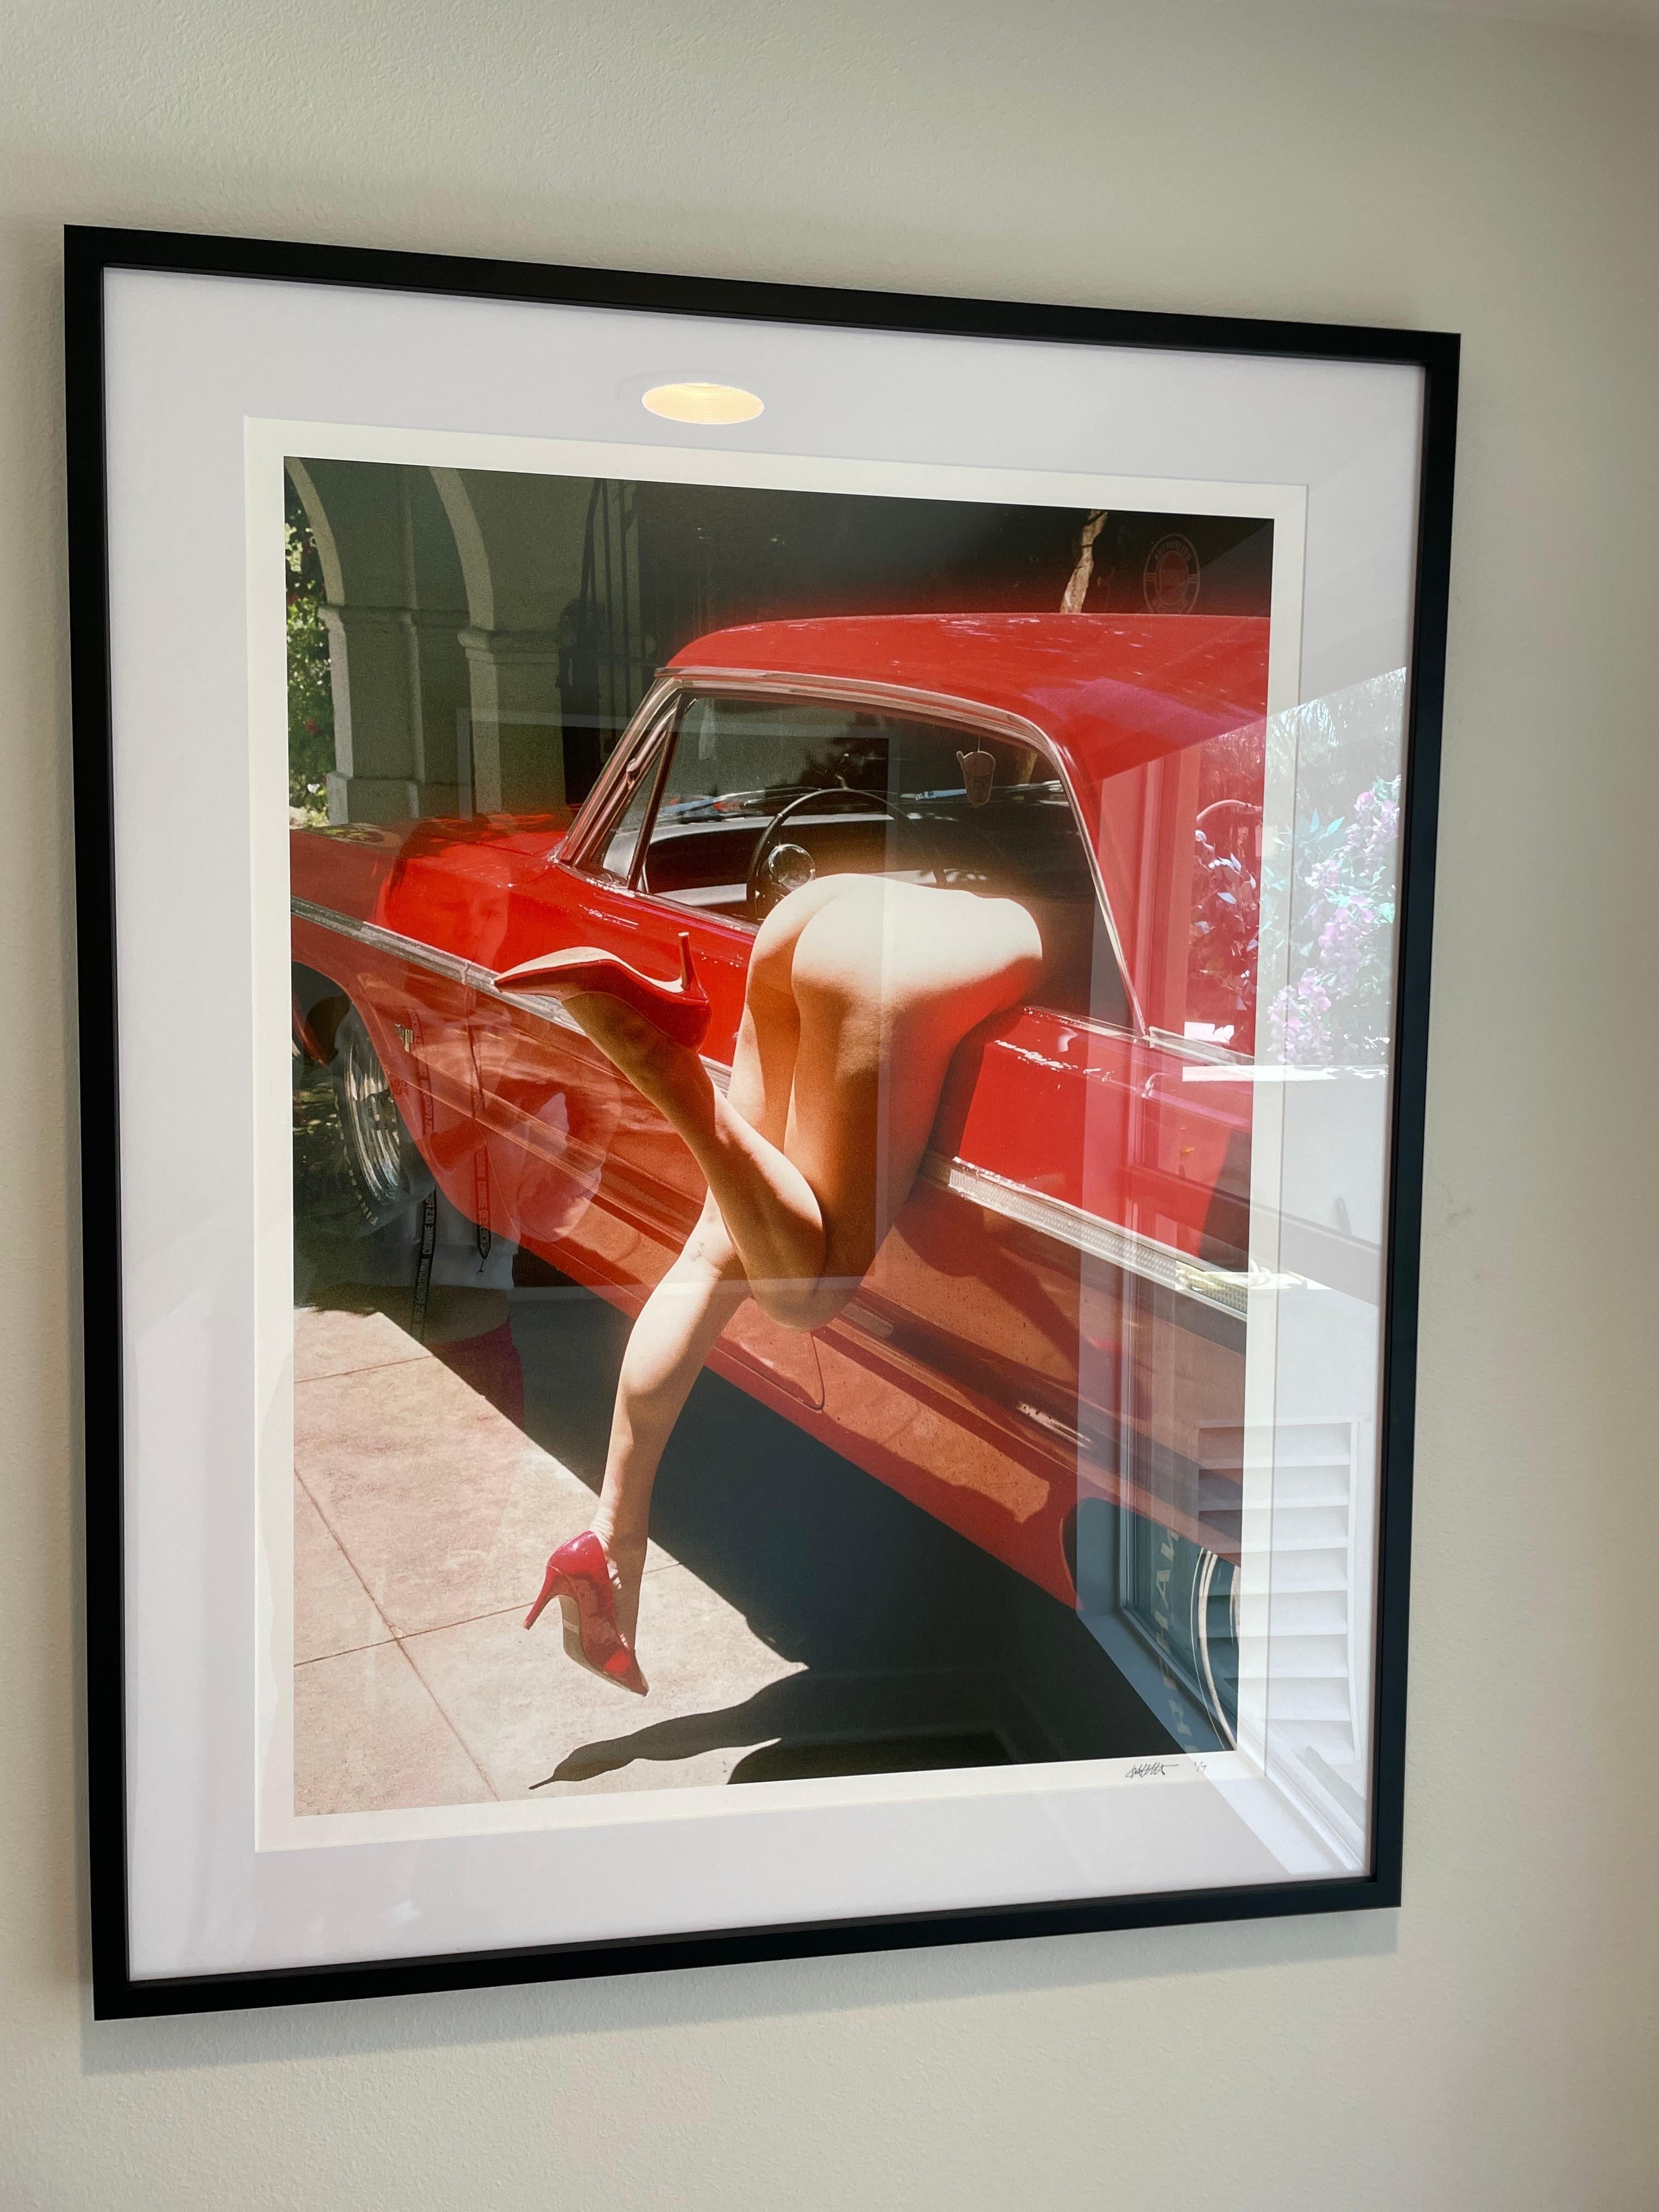 "Untitled 3" (En Rouge) Photography Edition 1/7  32" x 24" in by Larsen Sotelo 

FRAMED

Giclee (Archival Ink) print on 310G Platine Fibre Cotton Rag w/satin finish 32” X 24” inch
Limited Edition of 7
2020
Signed and numbered by the artist. 
Framed